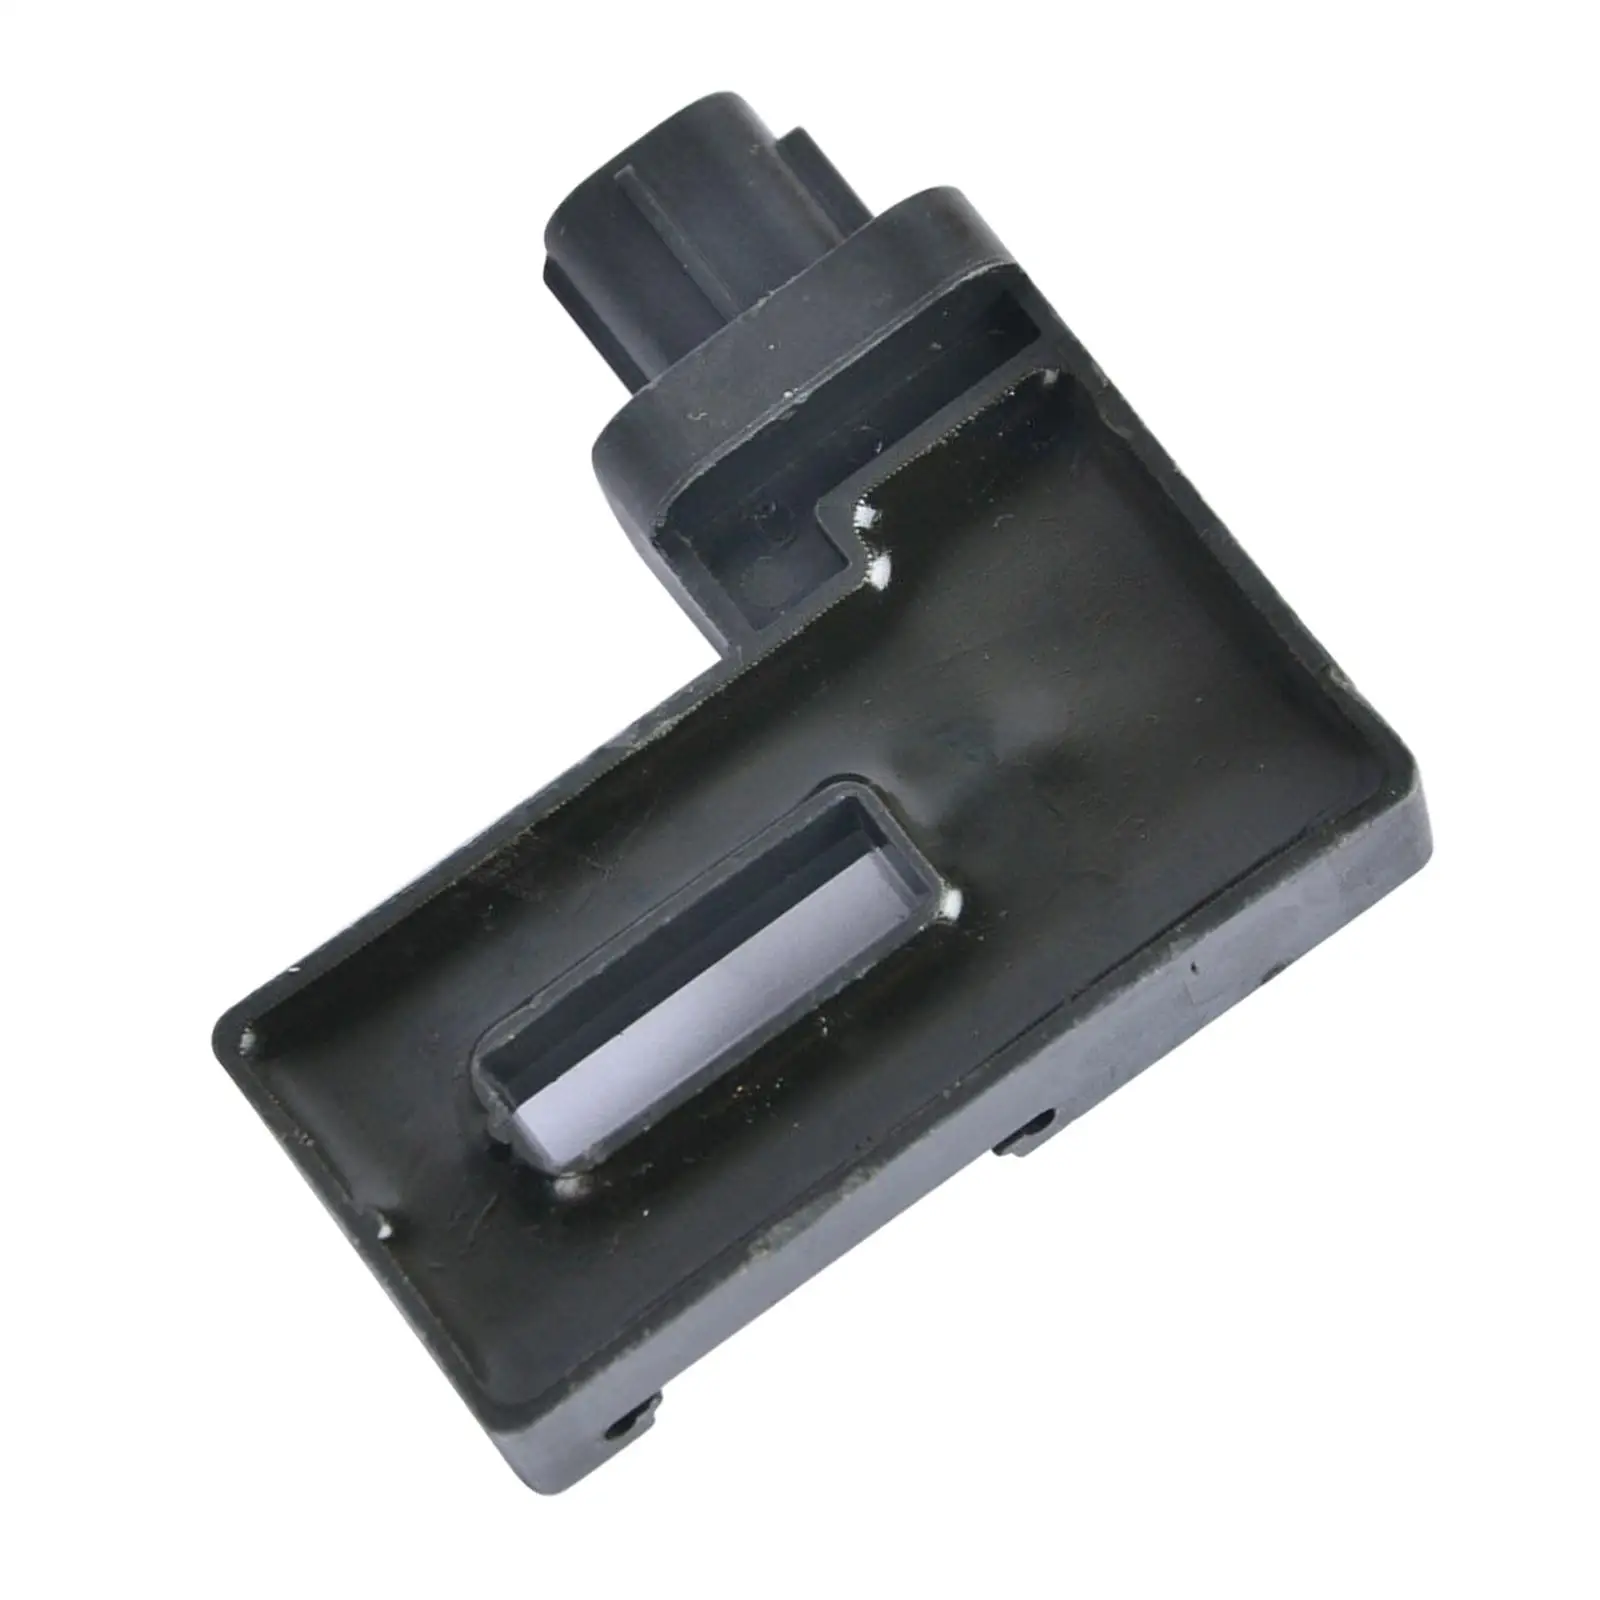 Battery Current Sensor, 294G0-1HH0A 14-2019, Parts Replace Easy to Install Accessories